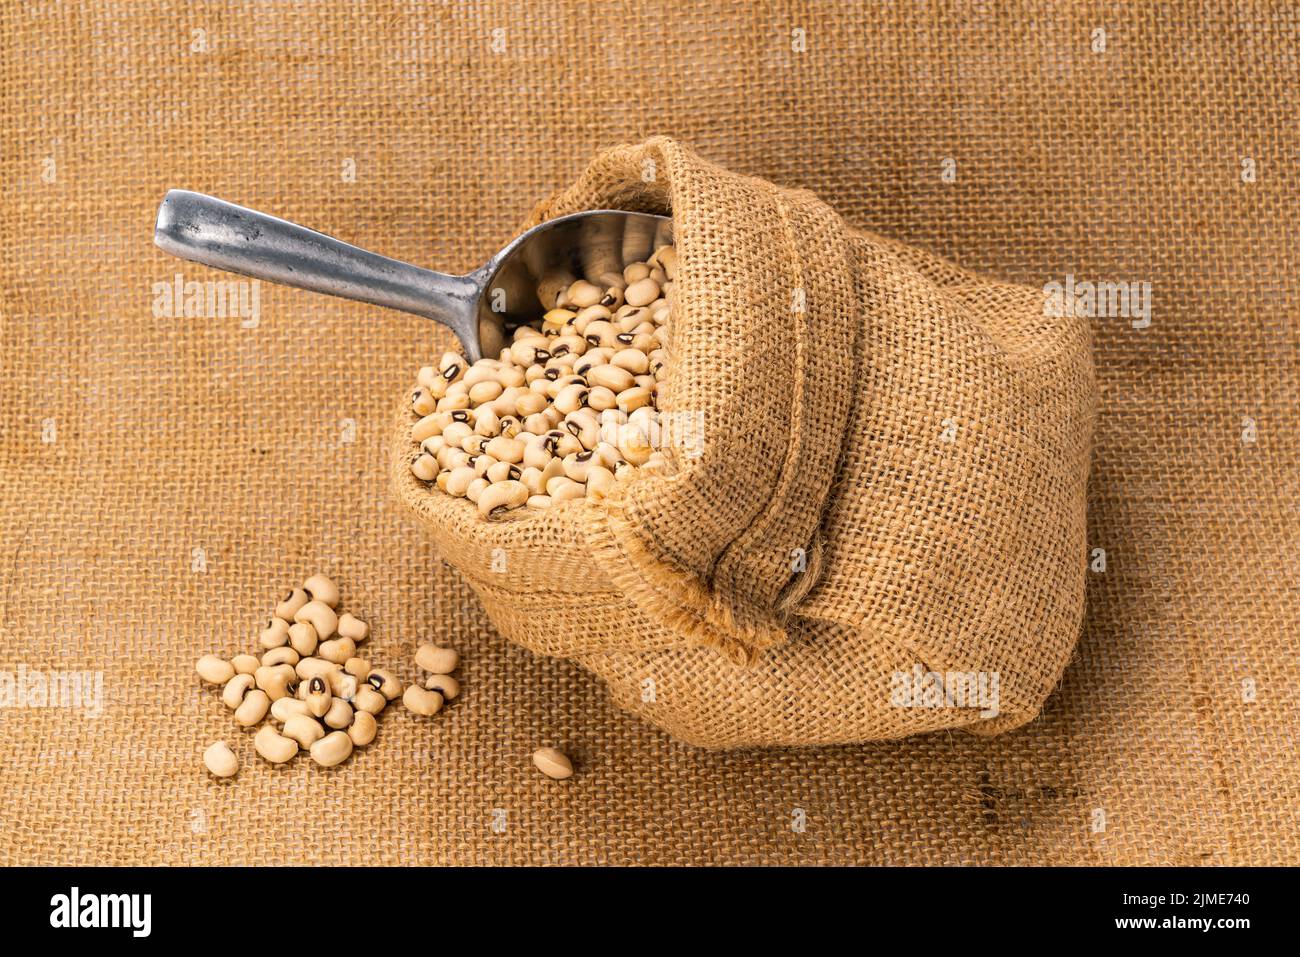 Closeup of soy beans in a sack with aluminum multi purpose scoop. Stock Photo